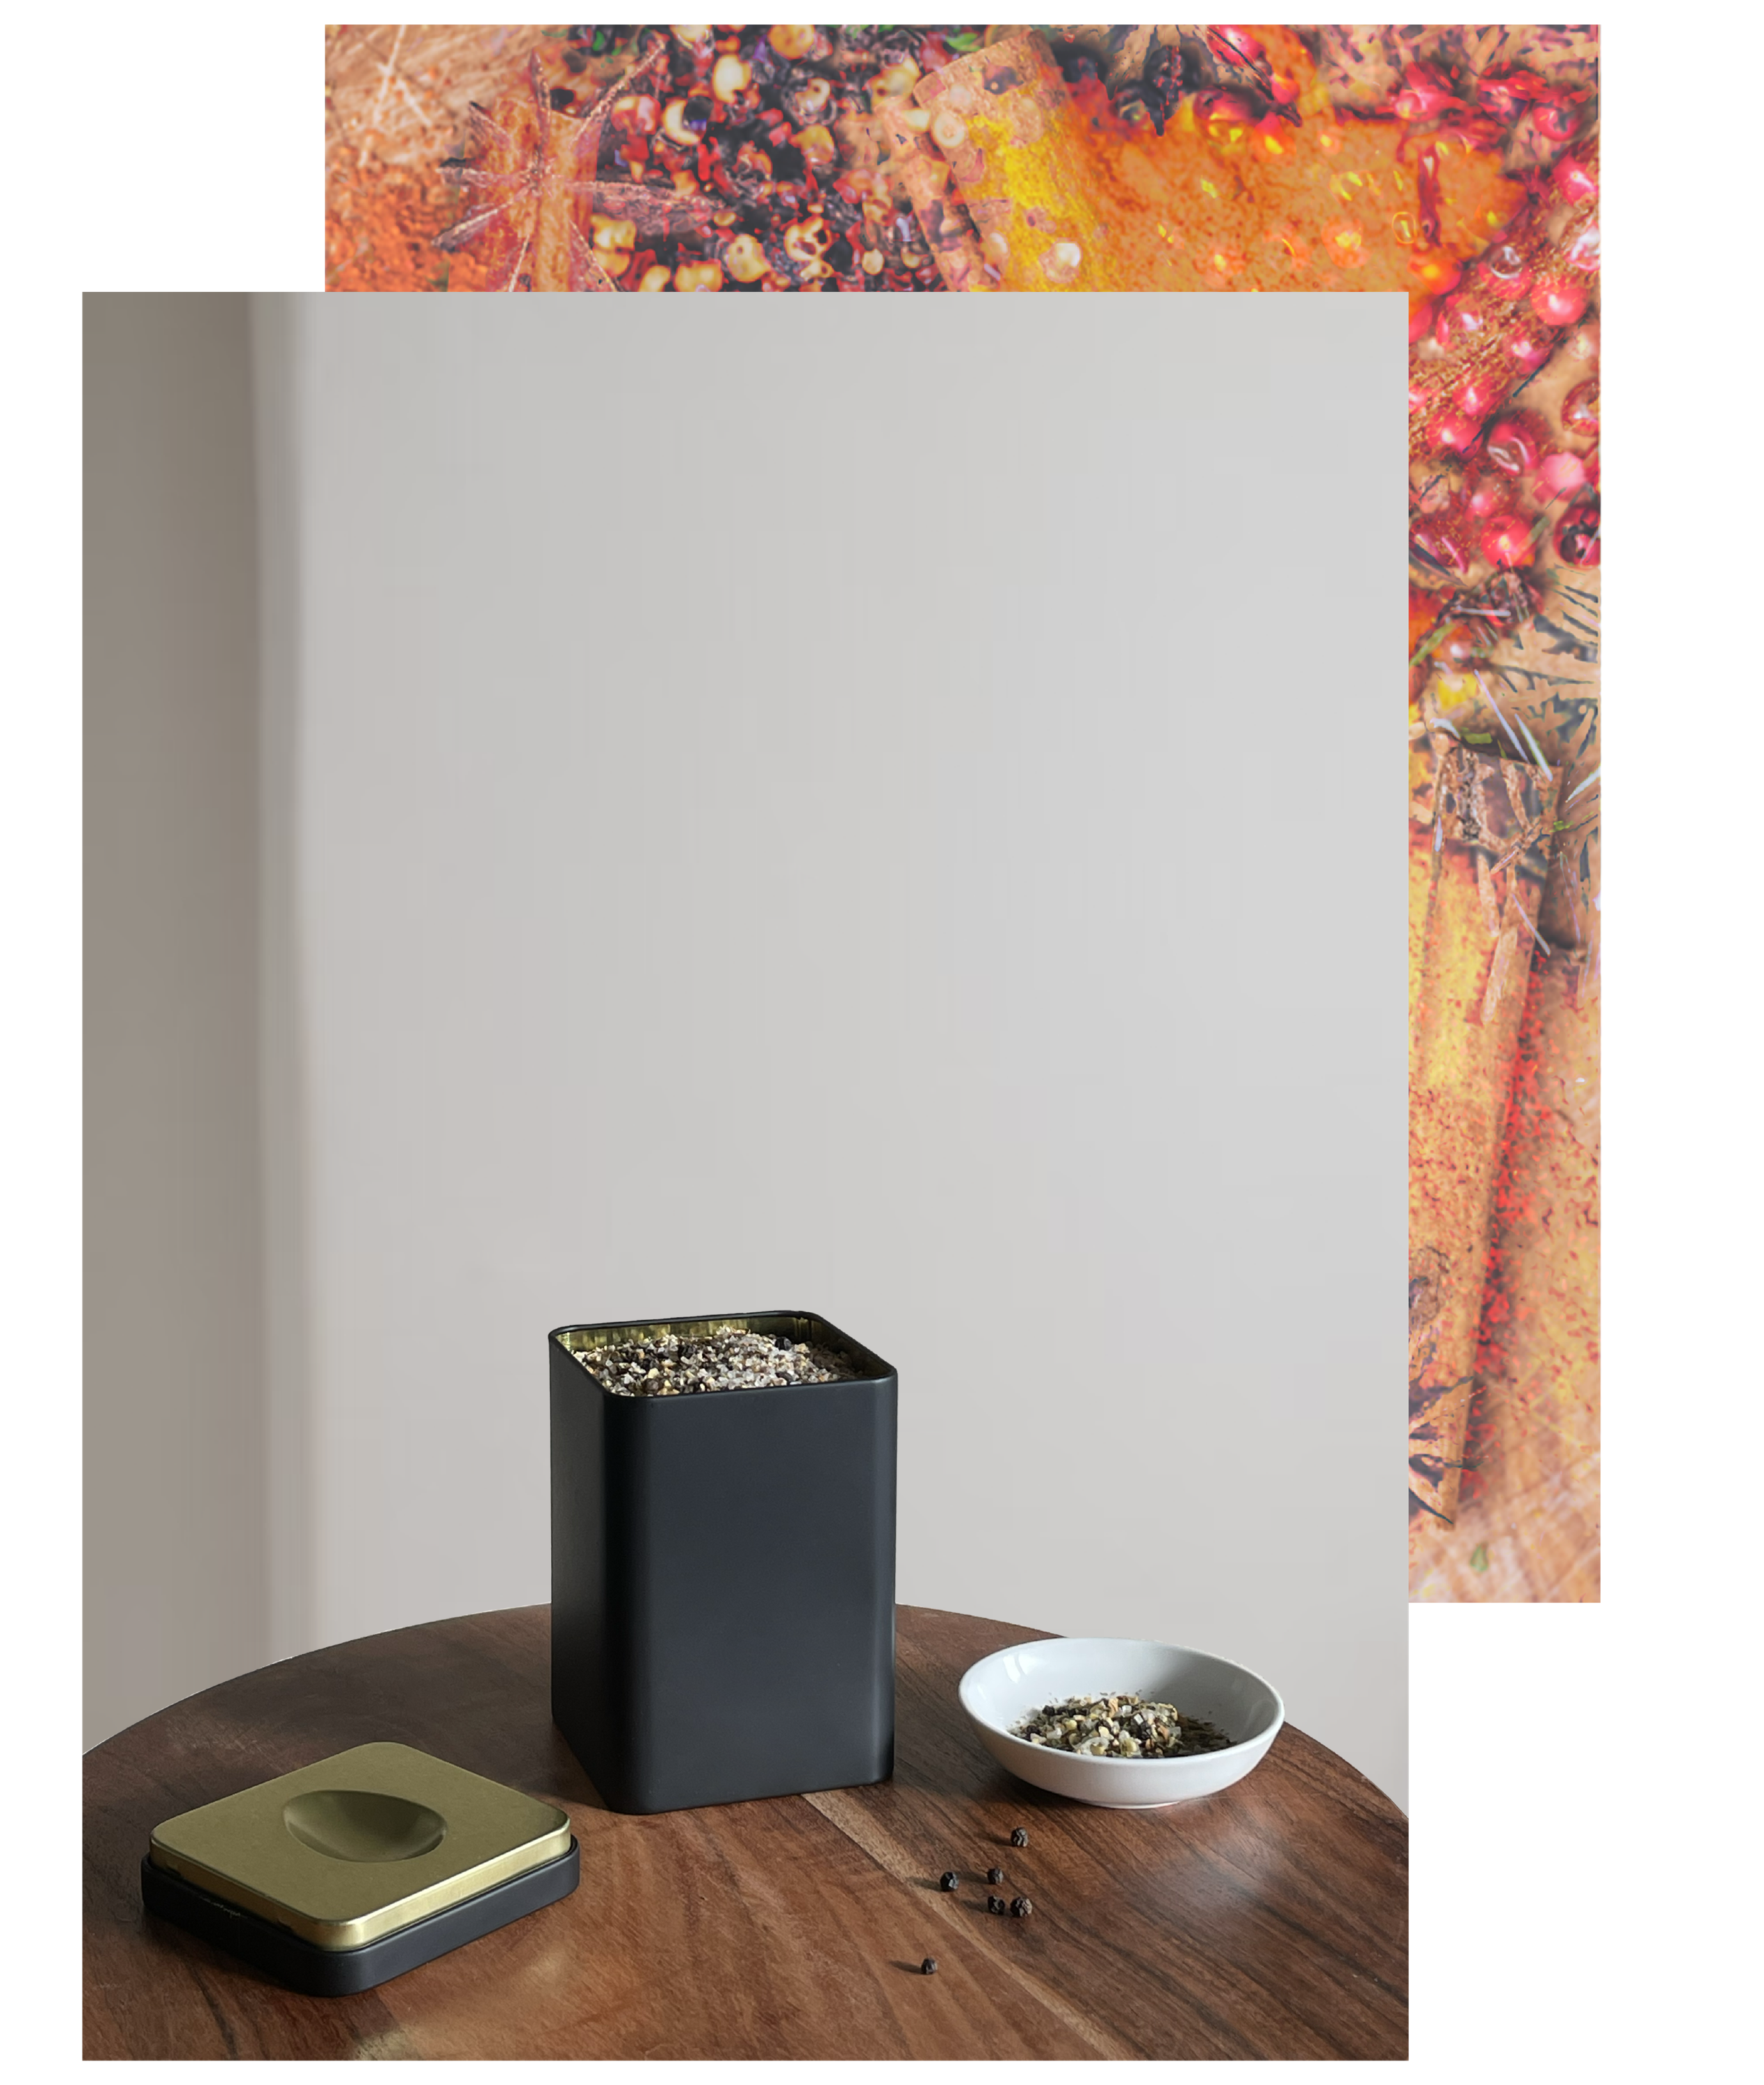 loose leaf tea packaging with holiday spice mix in tin with bowl on the right side on a wooden table the lid of the tin on the left side  loose pepper corn on the table. An image of a stylized mix of holiday spices is in the background.